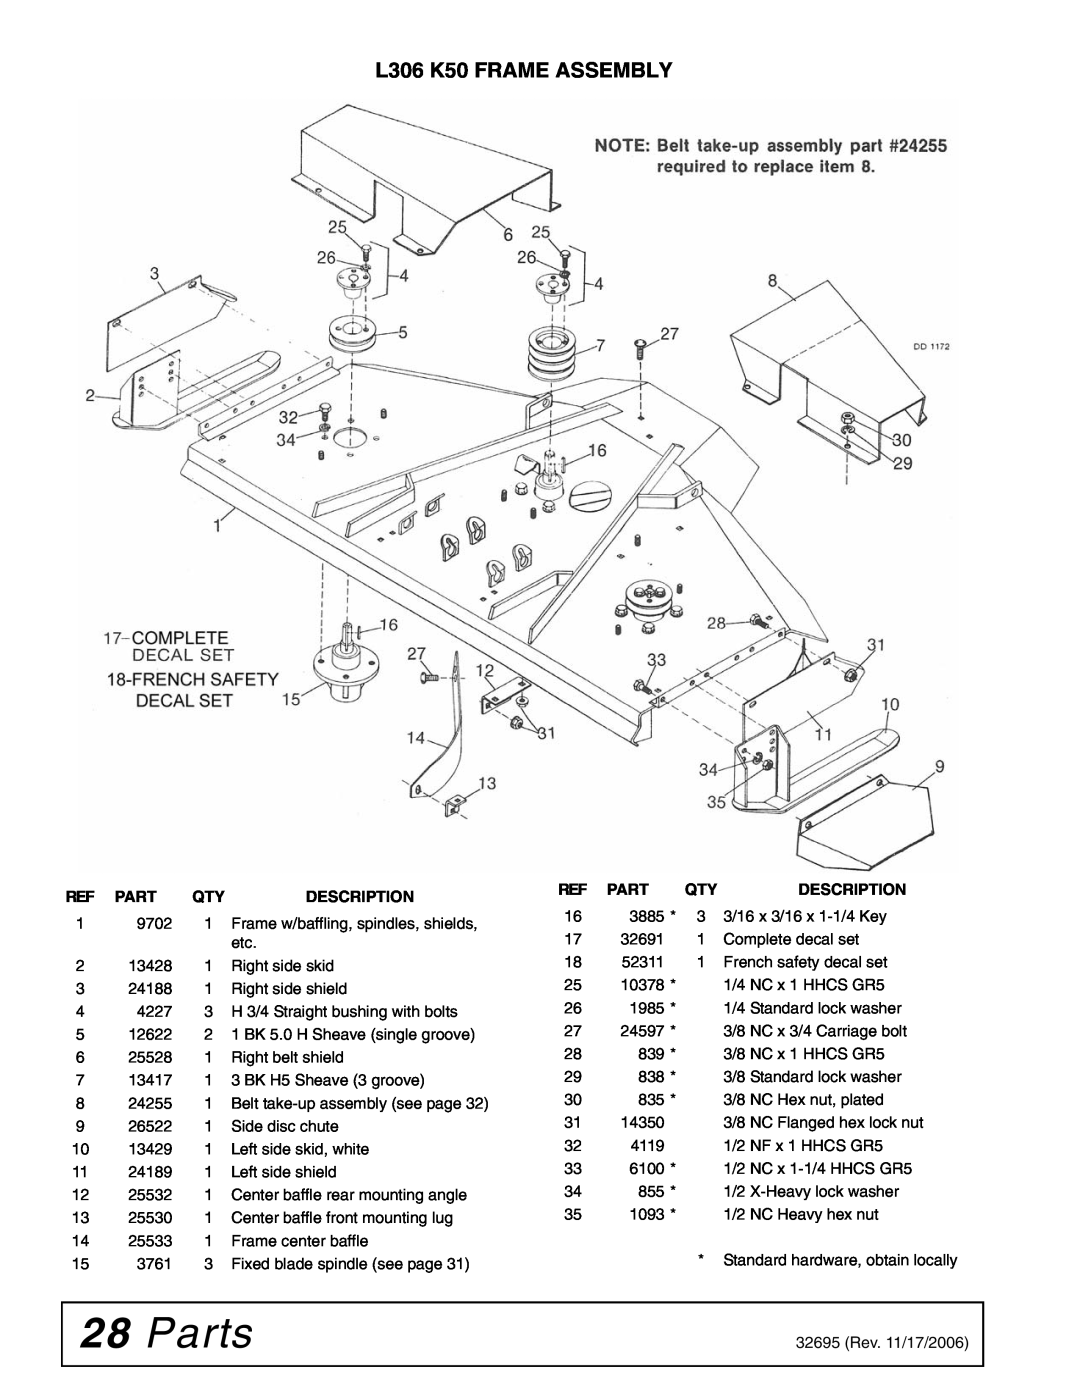 Woods Equipment manual Parts, L306 K50 FRAME ASSEMBLY 